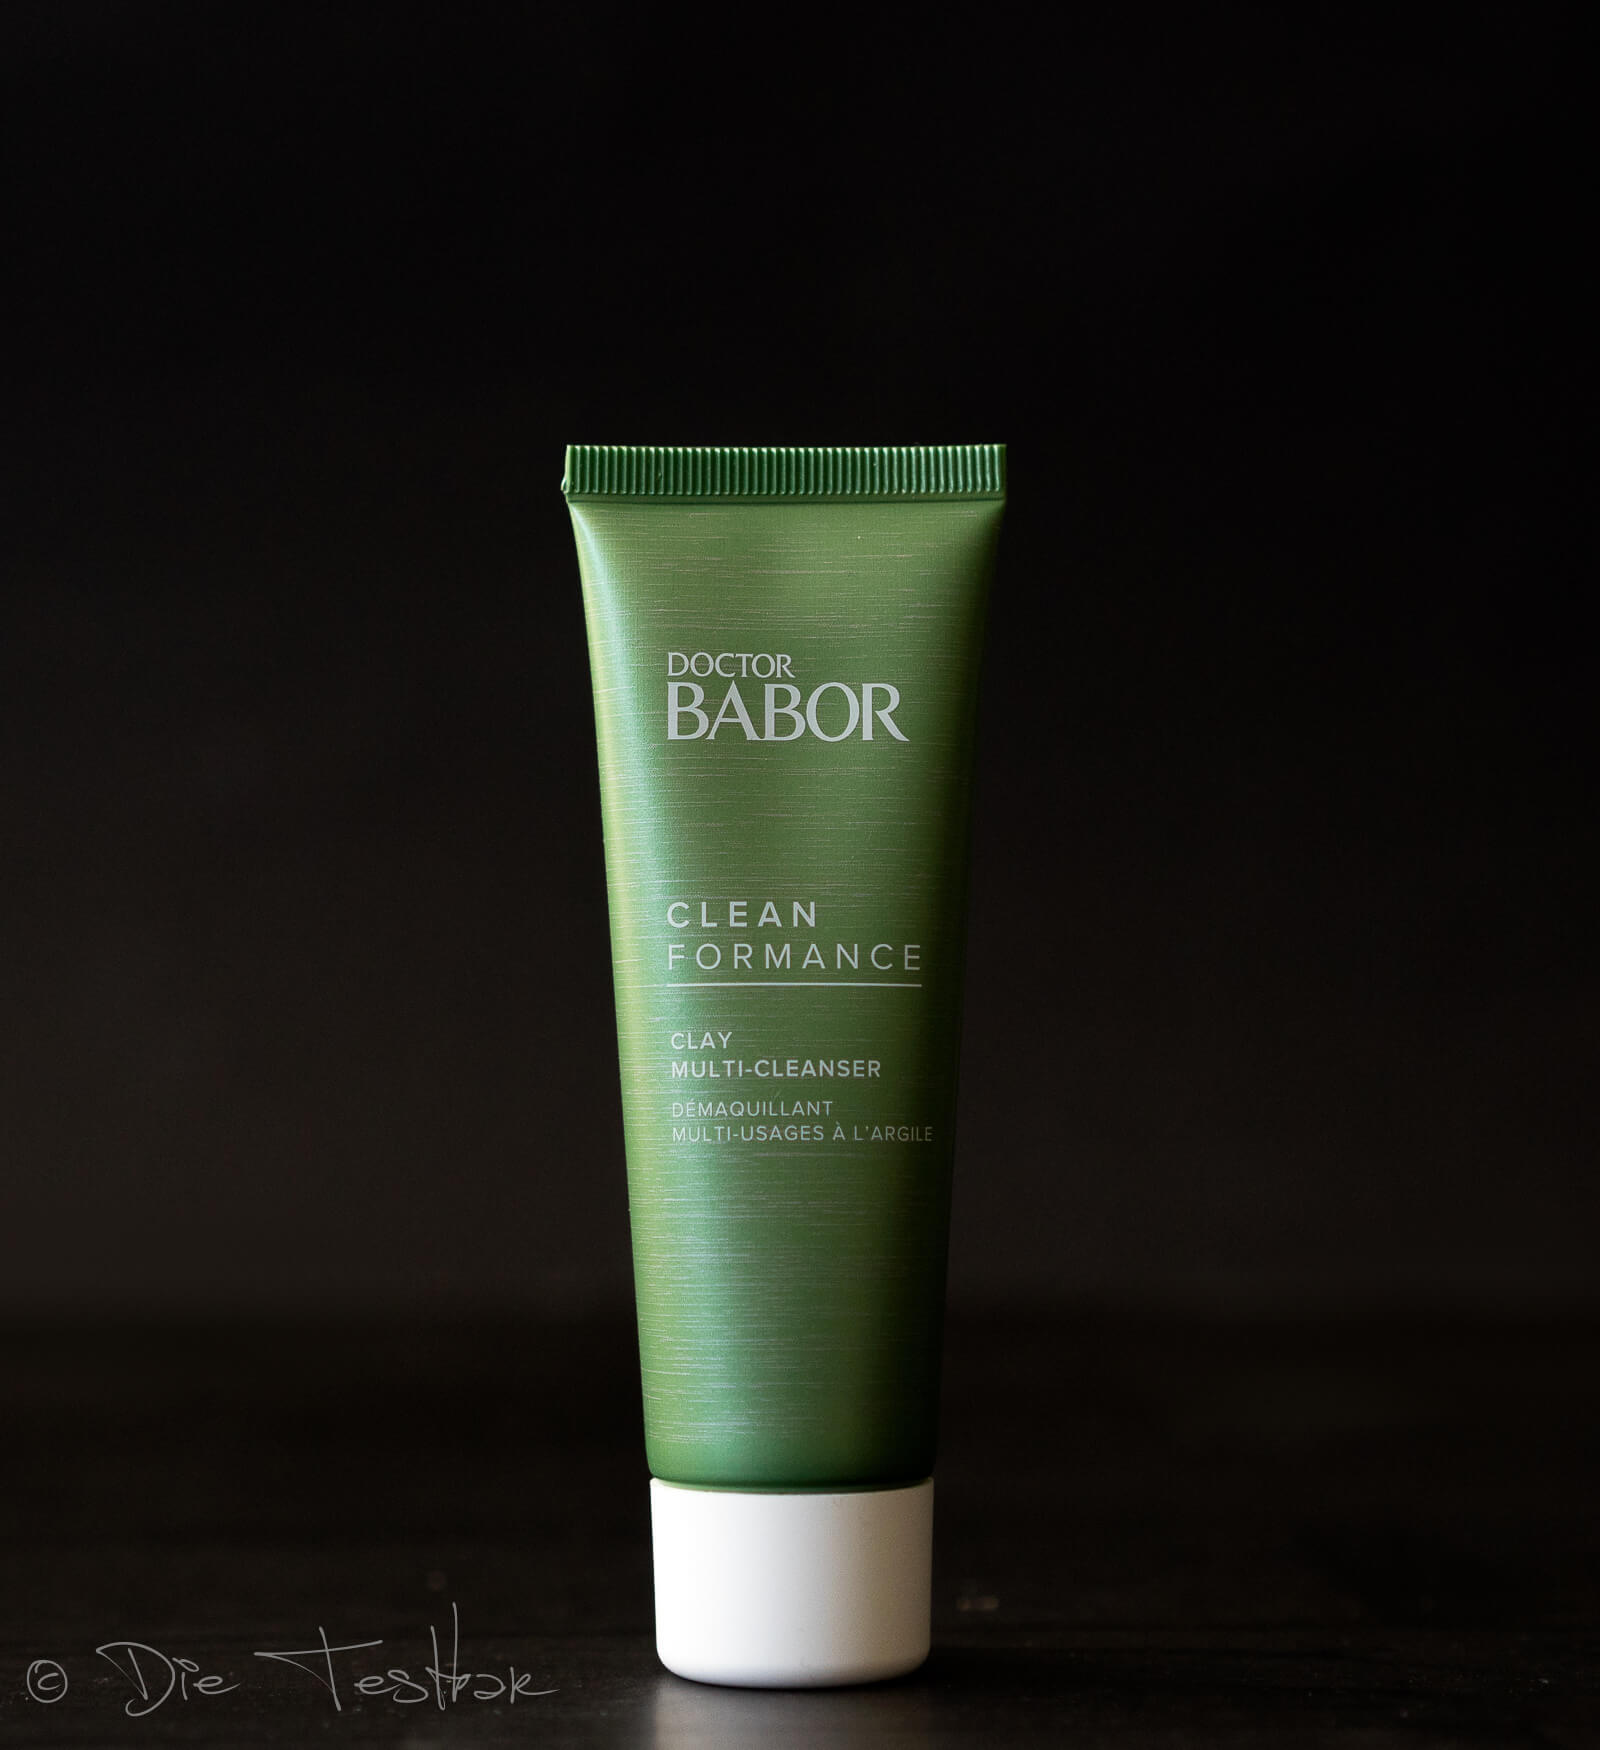 DOCTOR BABOR - CLEANFORMANCE - Clay Multi-Cleanser